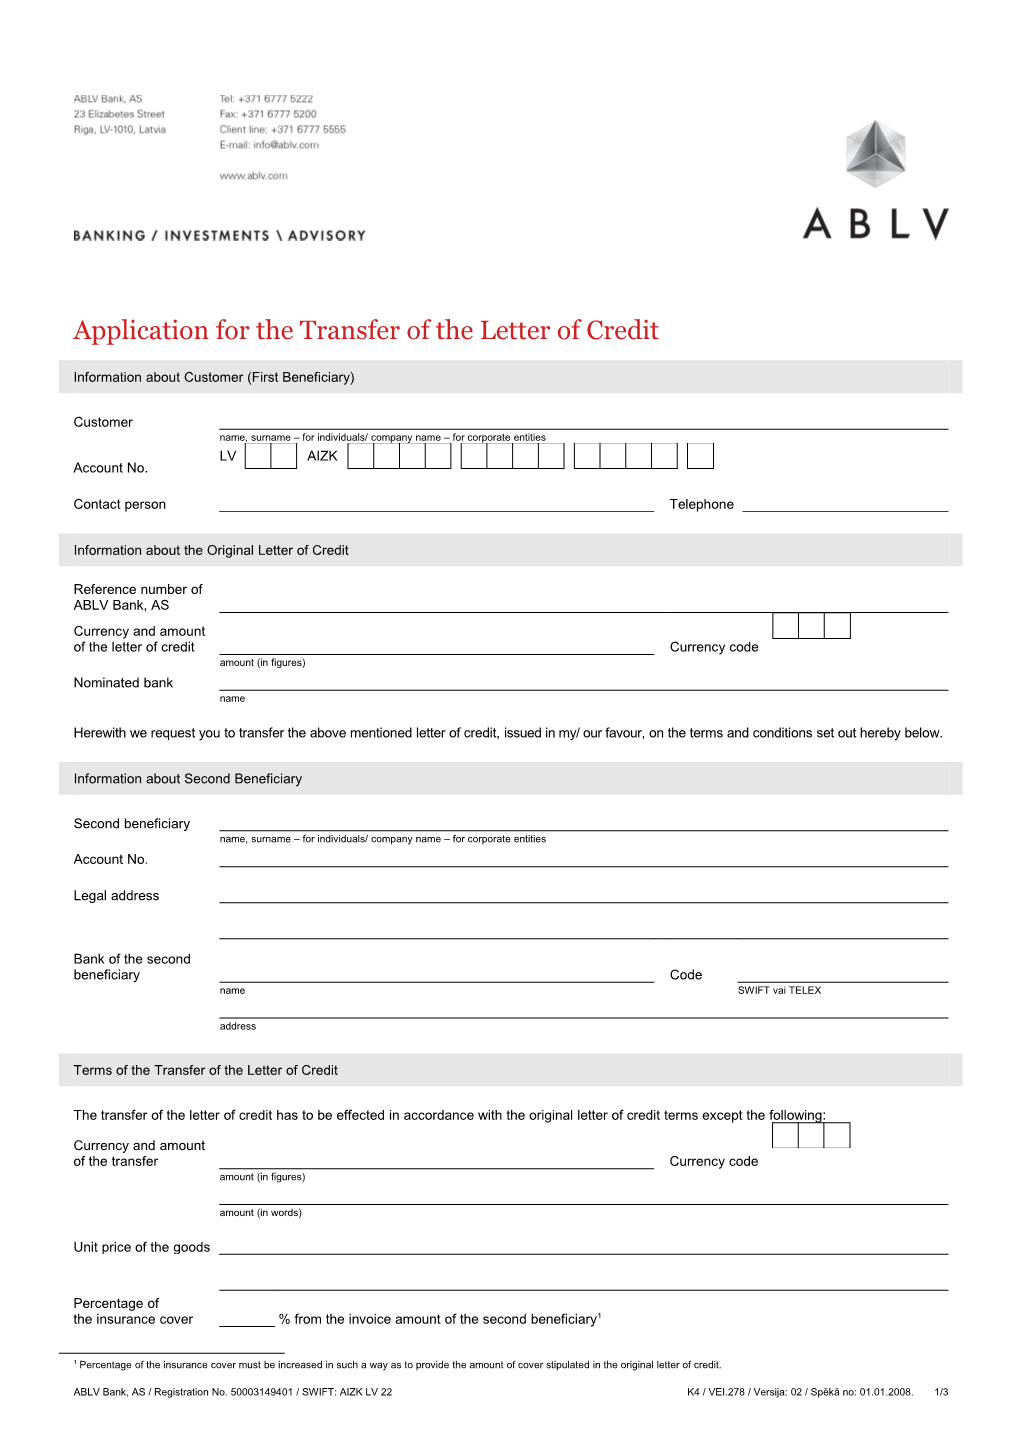 Application for the Transfer of the Letter of Credit